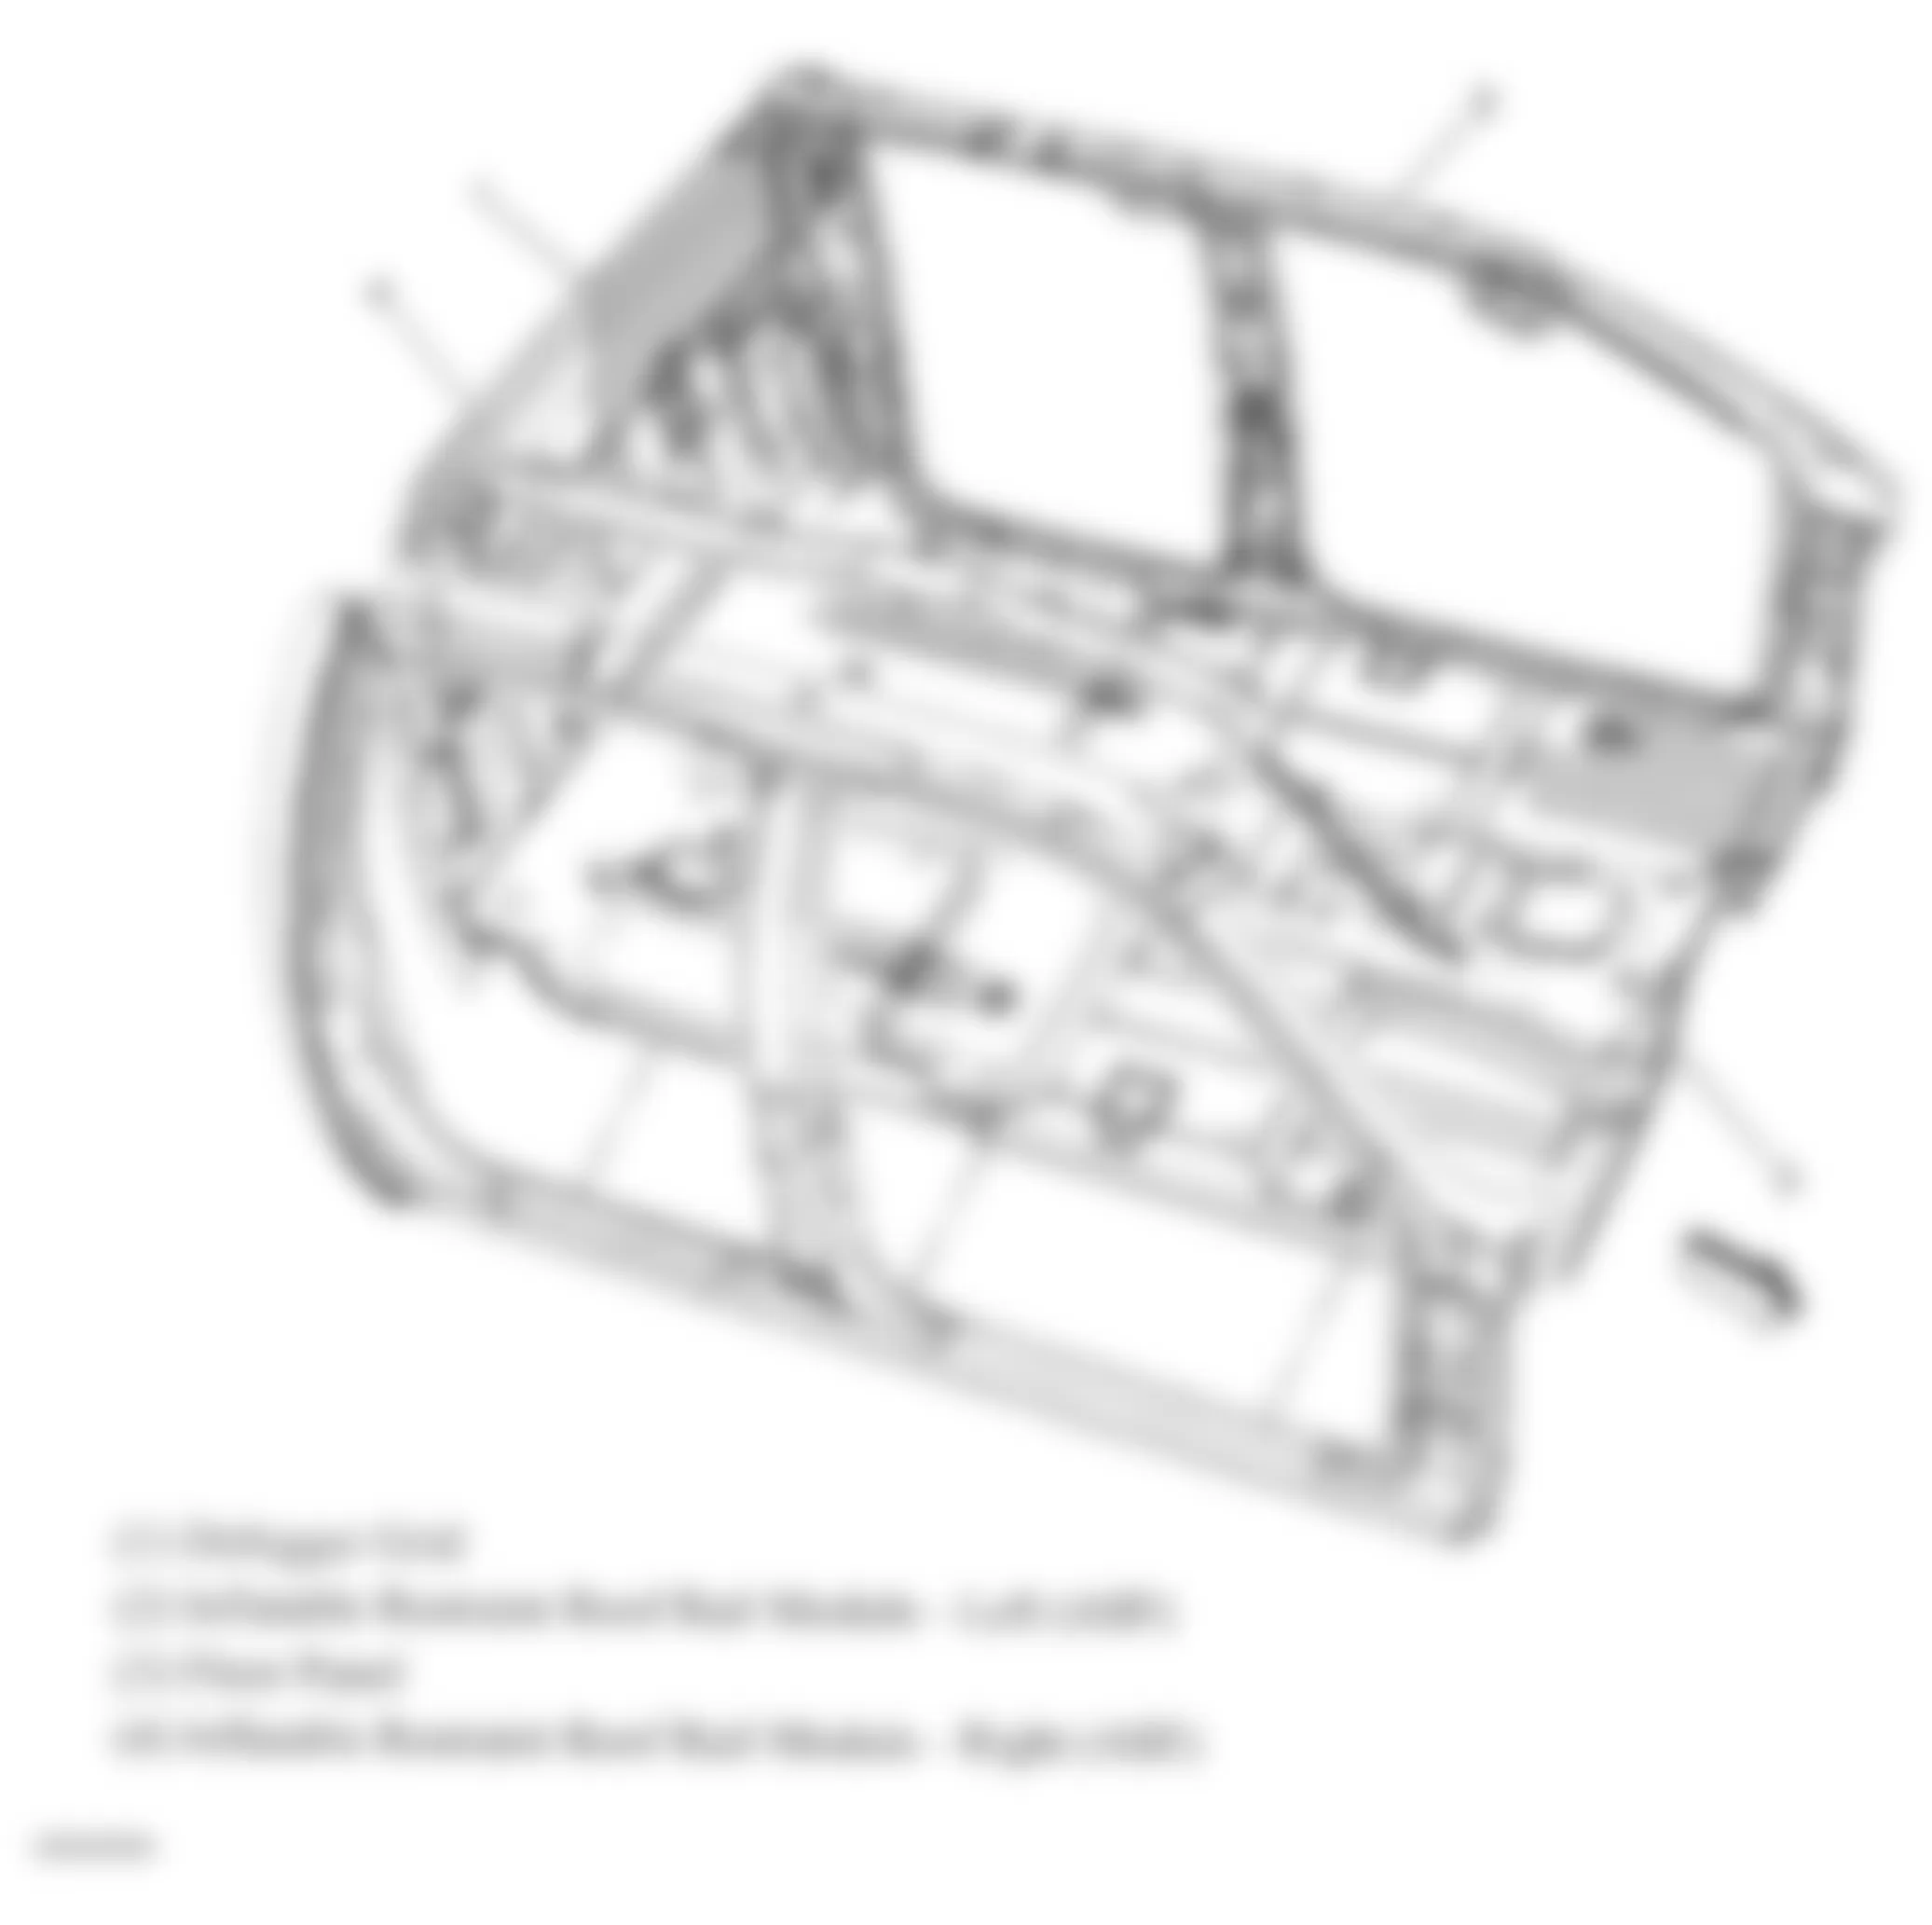 Chevrolet Silverado 3500 HD 2009 - Component Locations -  Roof Rail Air Bags (Extended Cab & Crew Cab)